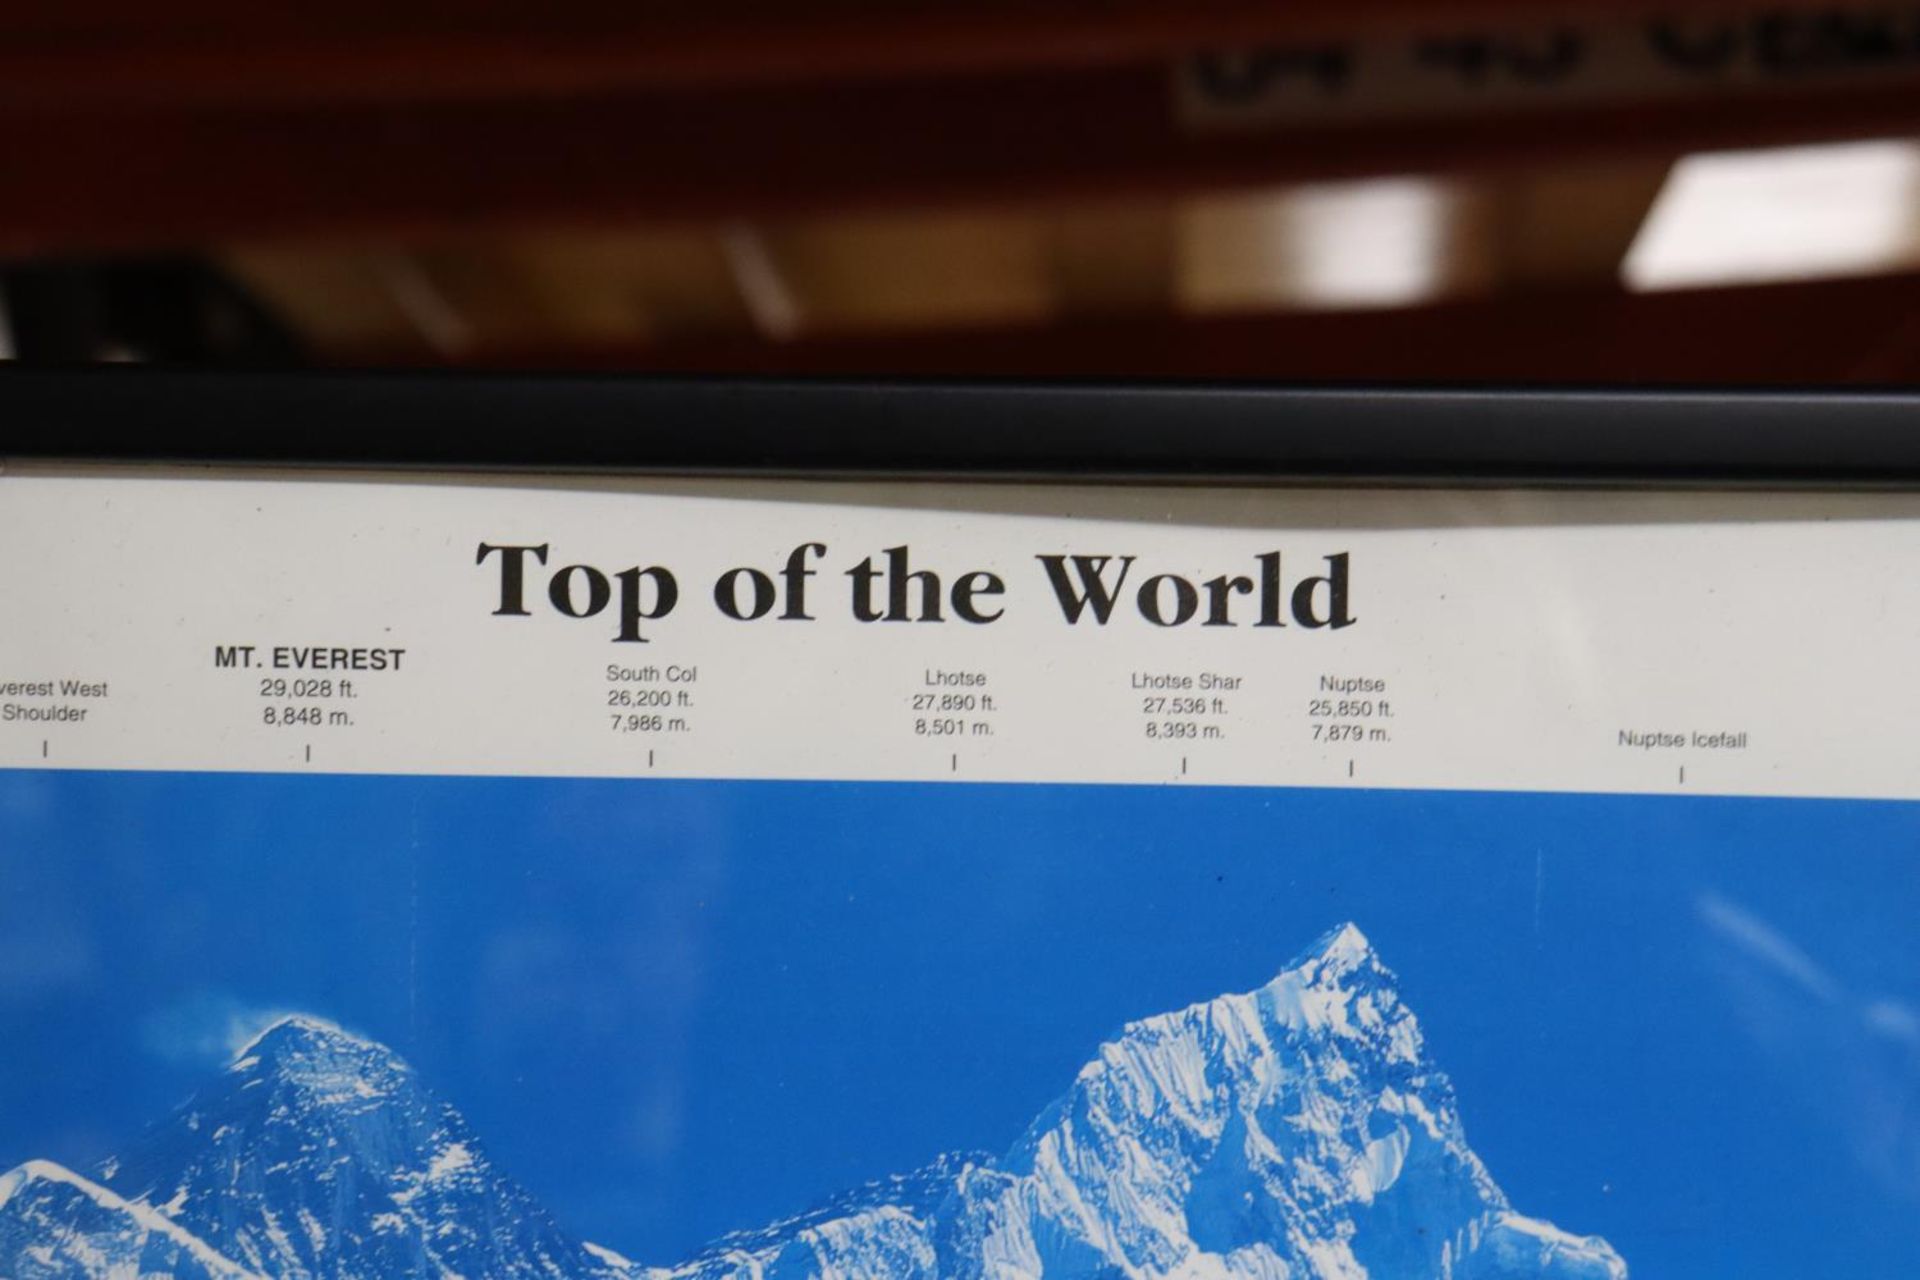 A PRINT OF EVEREST, 'TOP OF THE WORLD' - Image 3 of 5